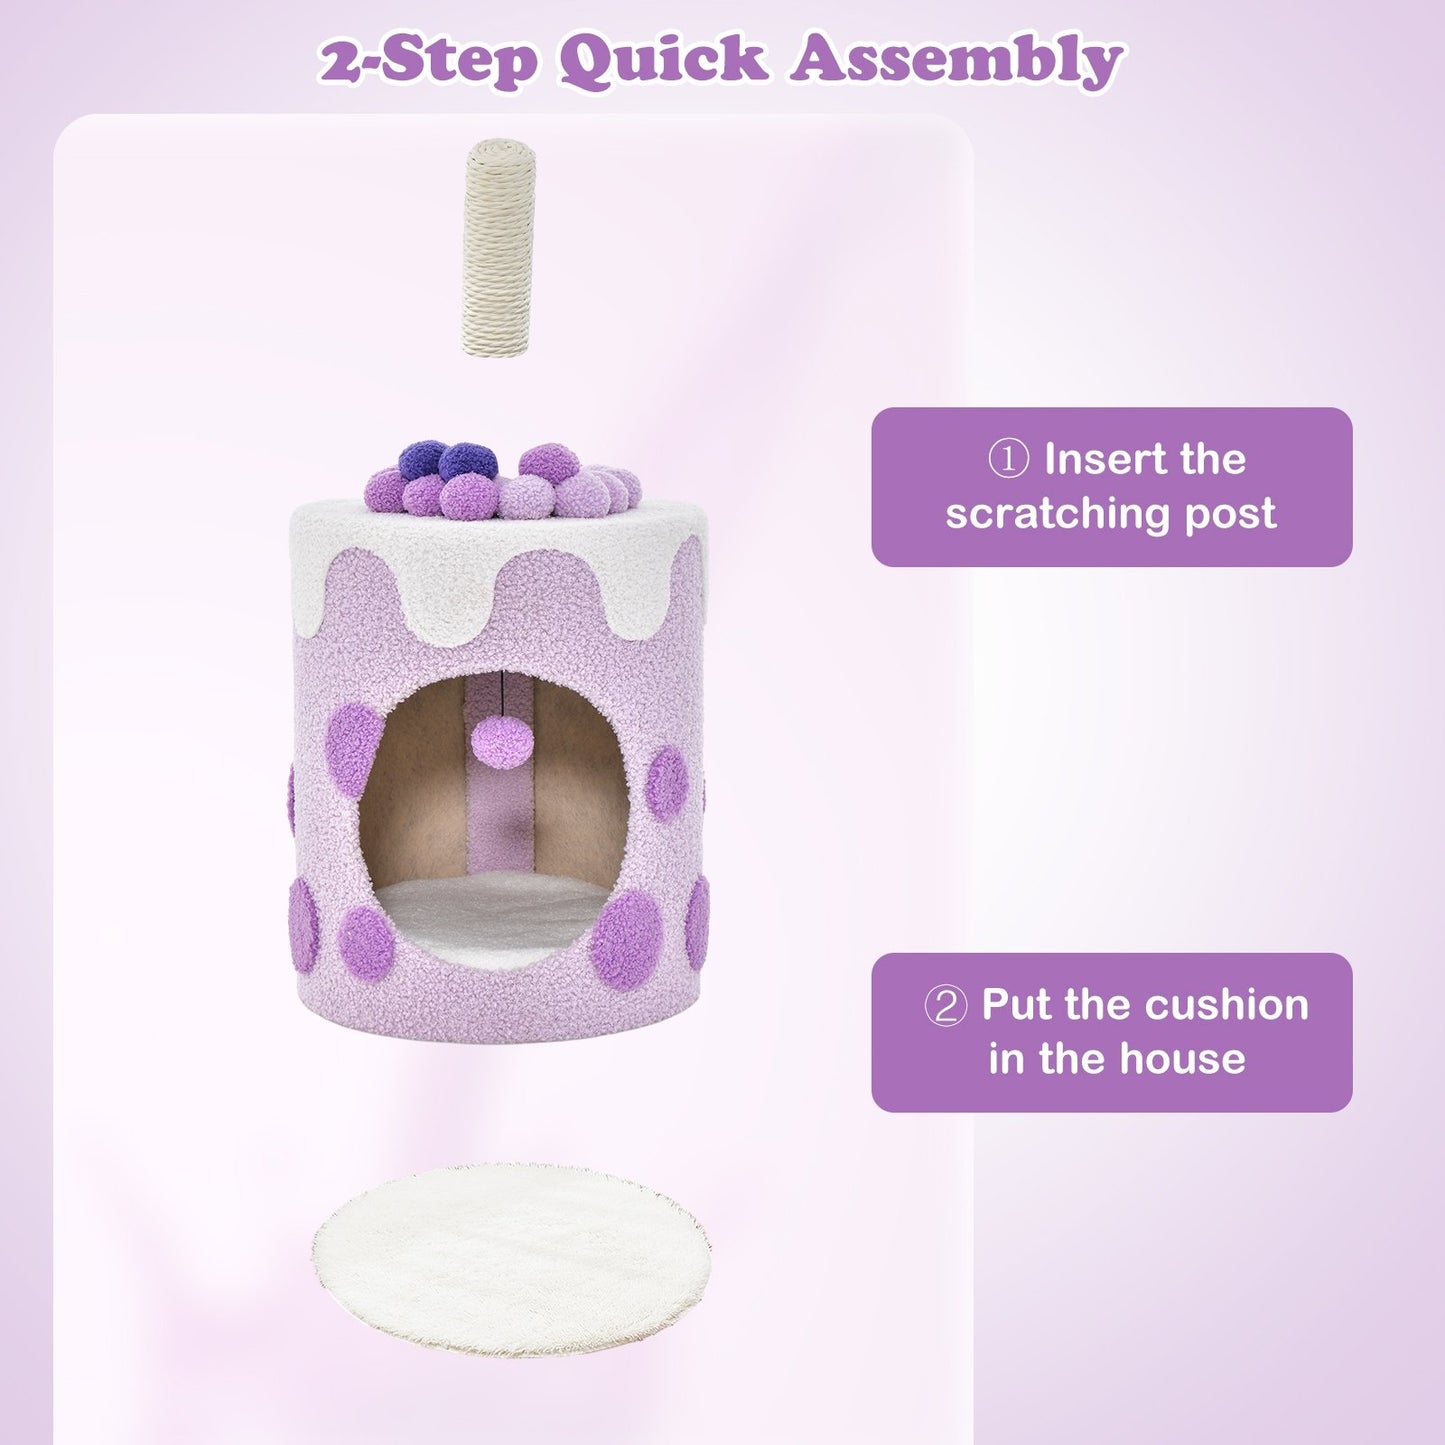 Bubble Tea Cat Tree Tower with Scratching Post, Purple